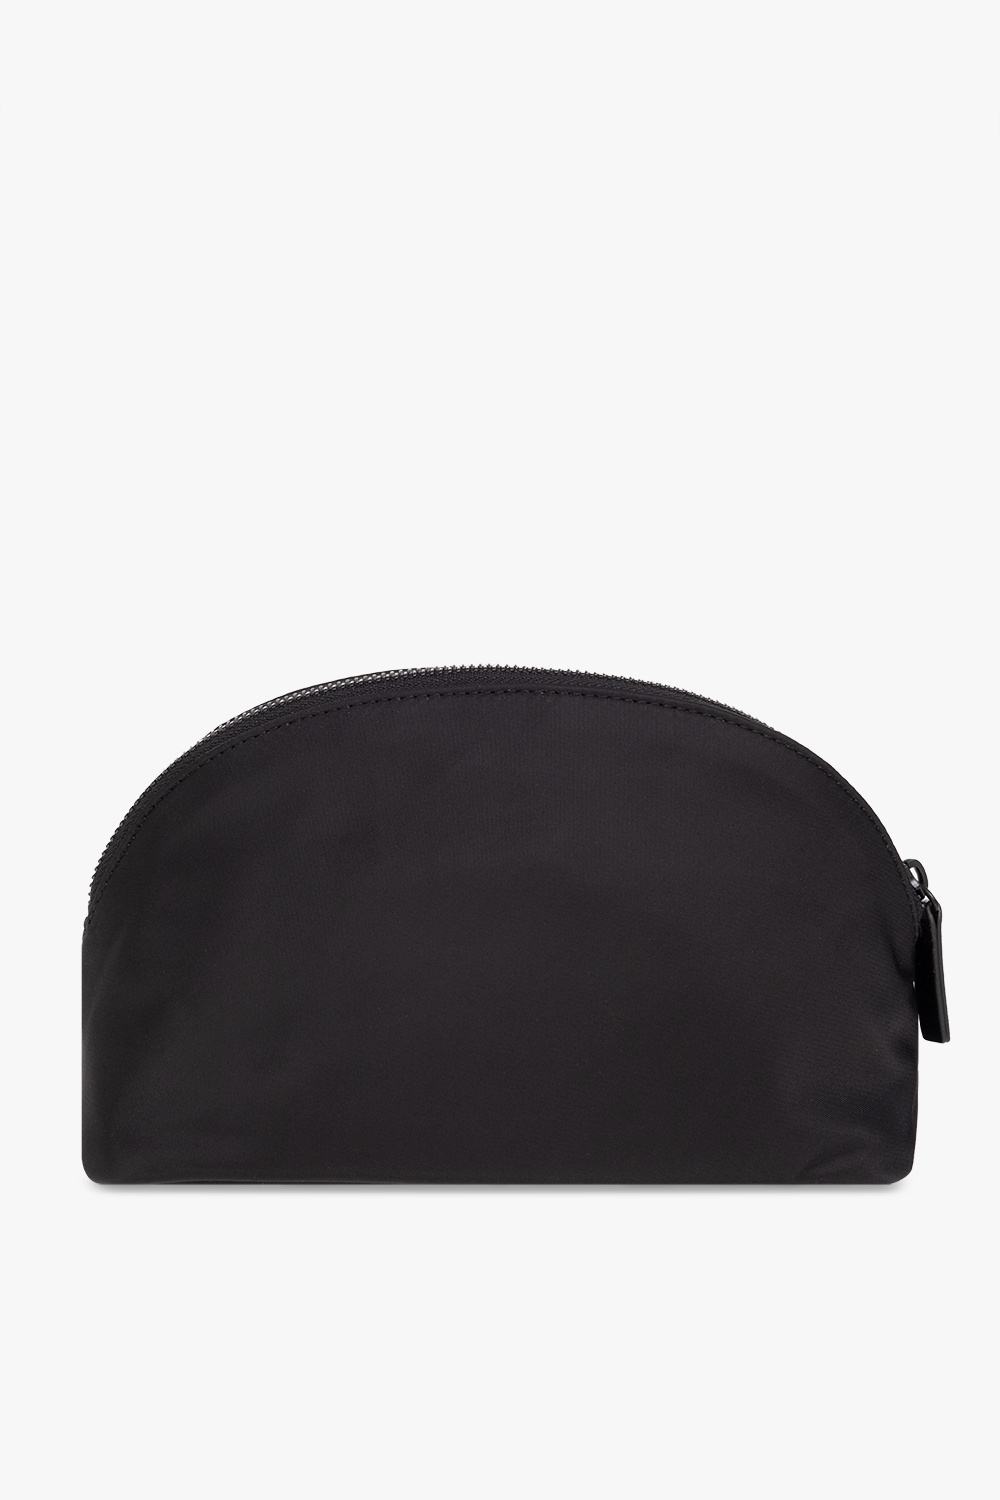 Dsquared2 Collection Waist Bag